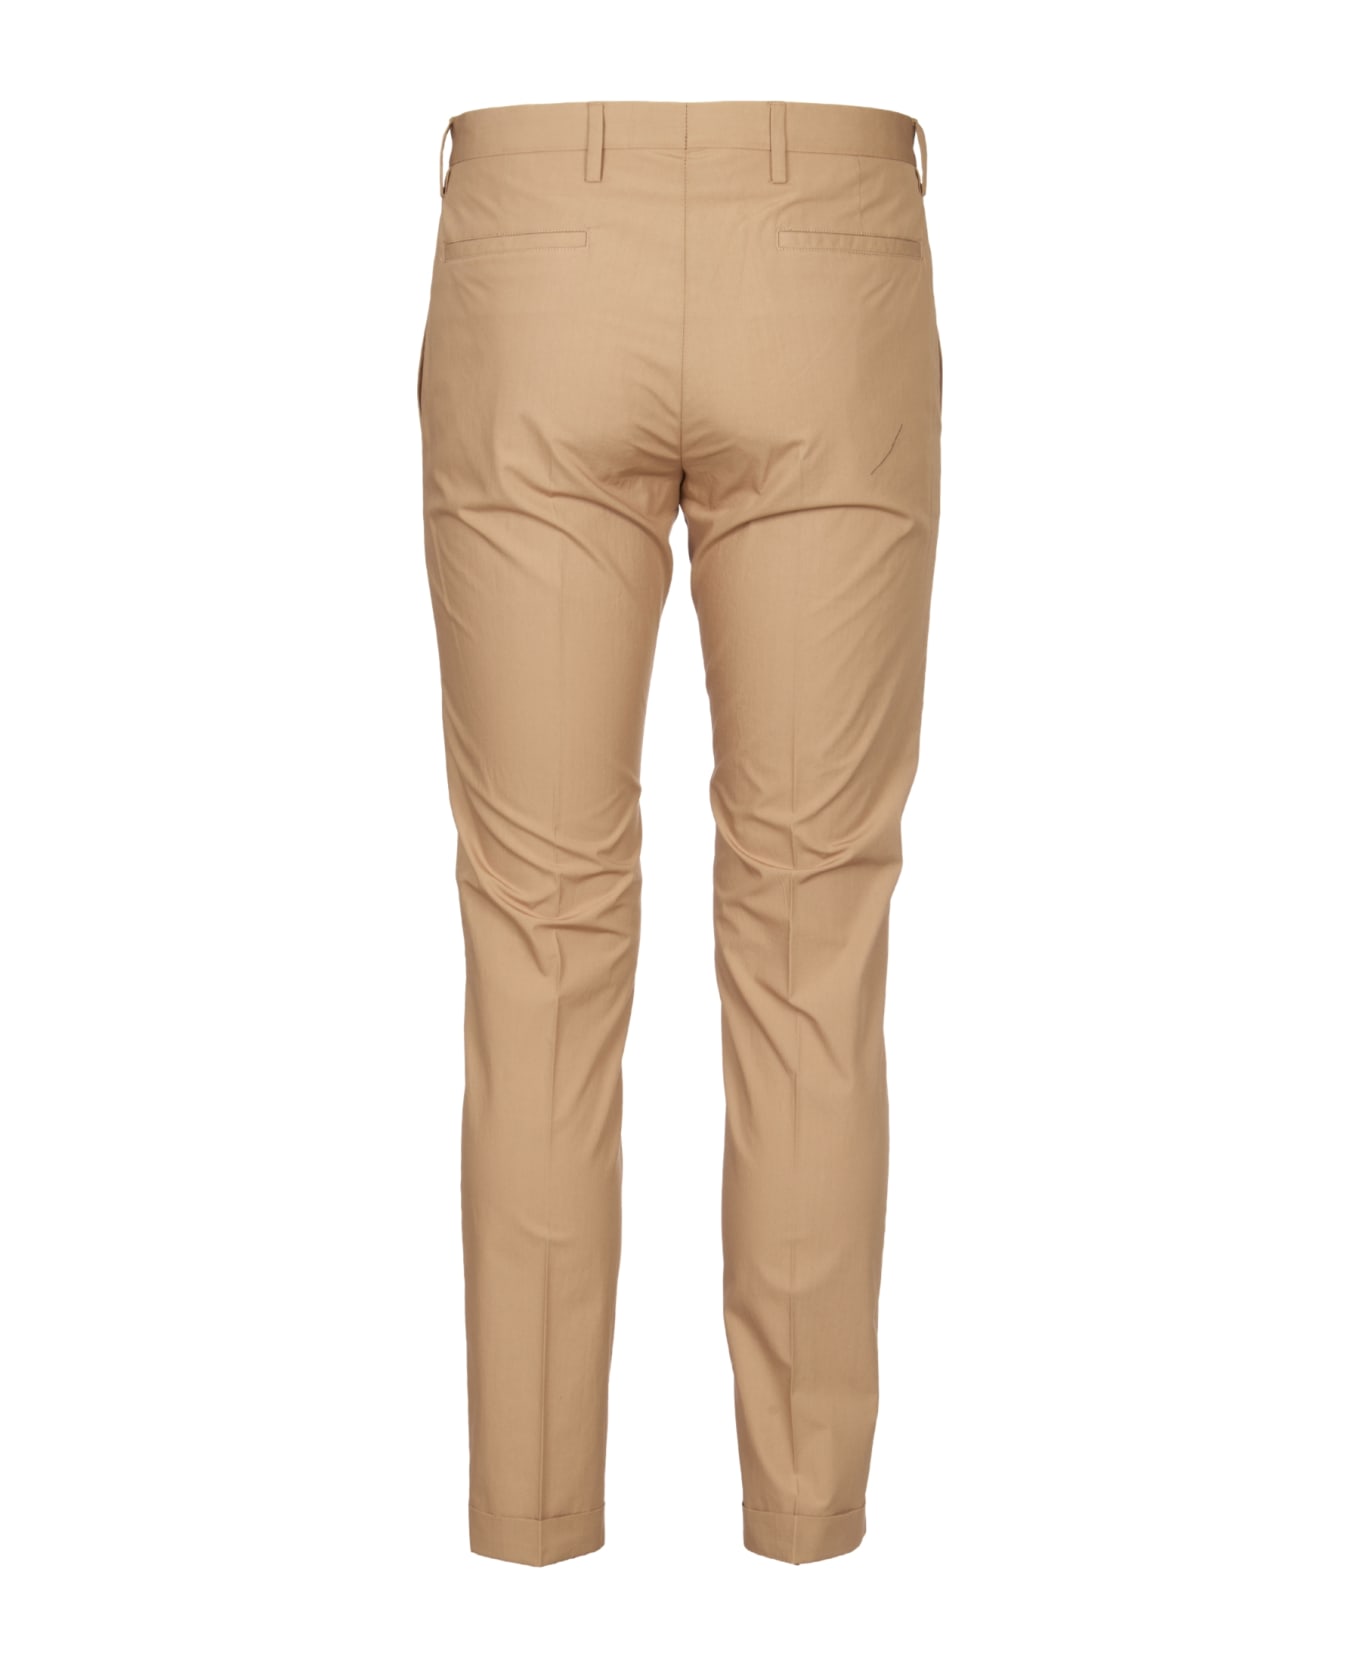 Paul Smith Trousers - Brown